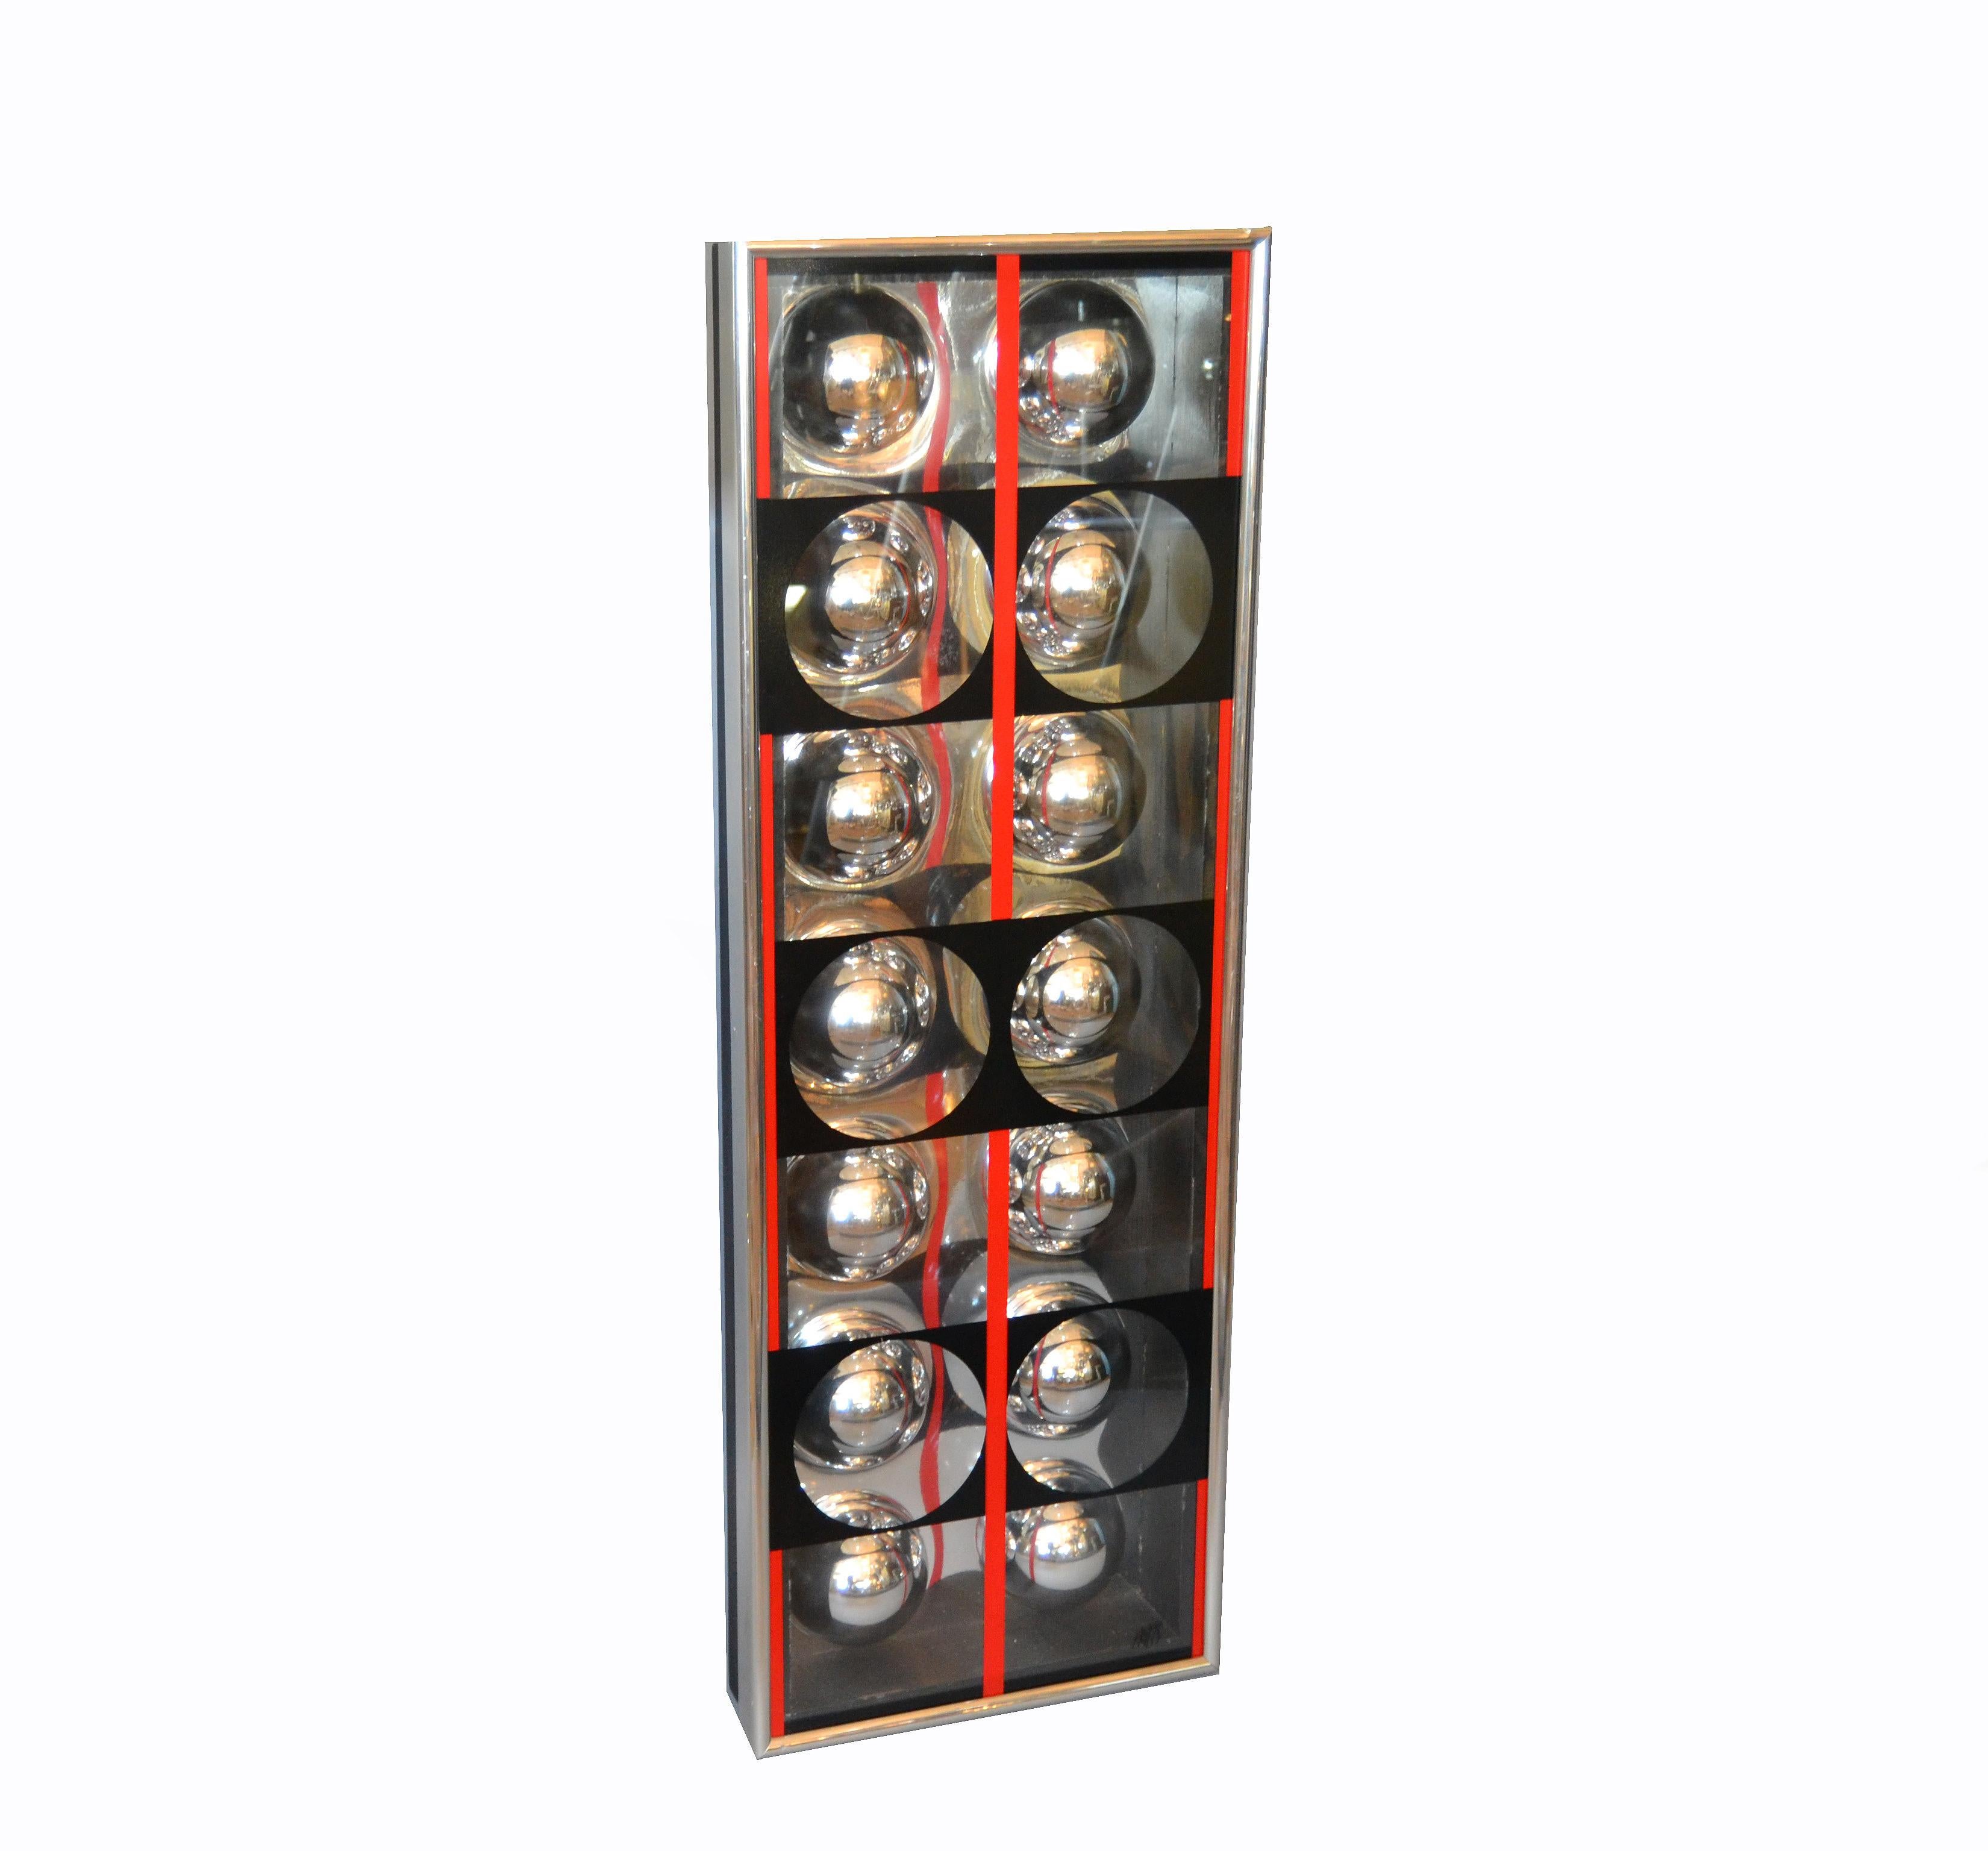 Mod wall art by Ron Fritts for RF Studios INC. The wall sculptural piece has depth- the half chrome semi-spheres are mounted under an acrylic cover with graphic designs. 
Signed 'Fritts' at the front right corner and labeled on the wooden back with